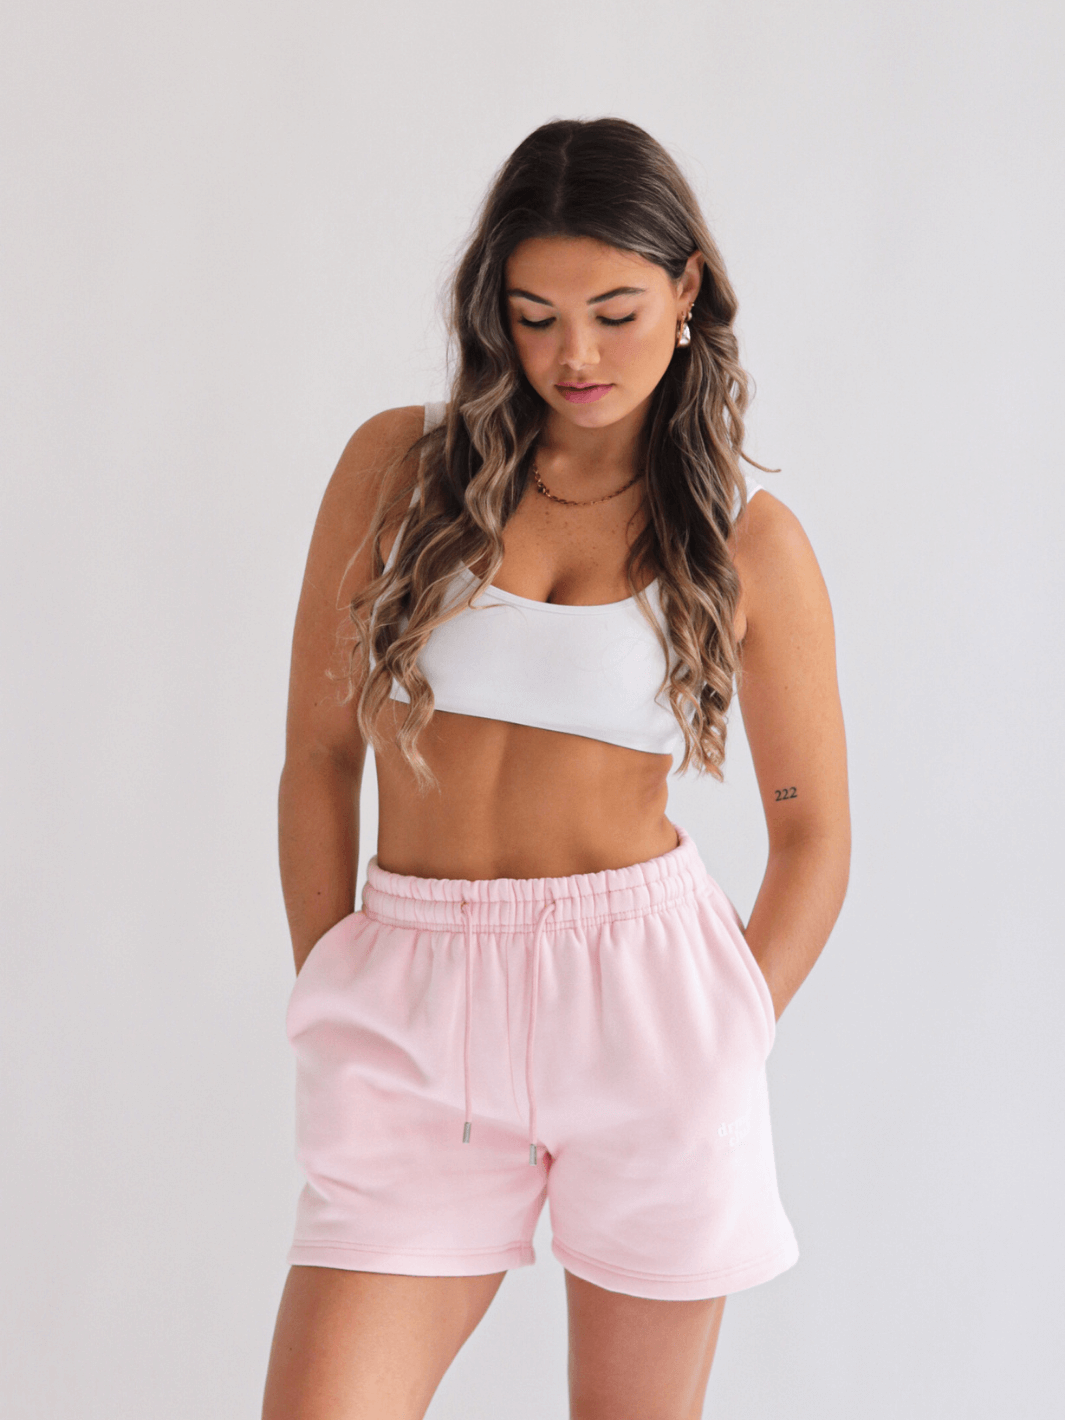 MEMBERS ONLY SWEAT SHORTS - BABY PINK